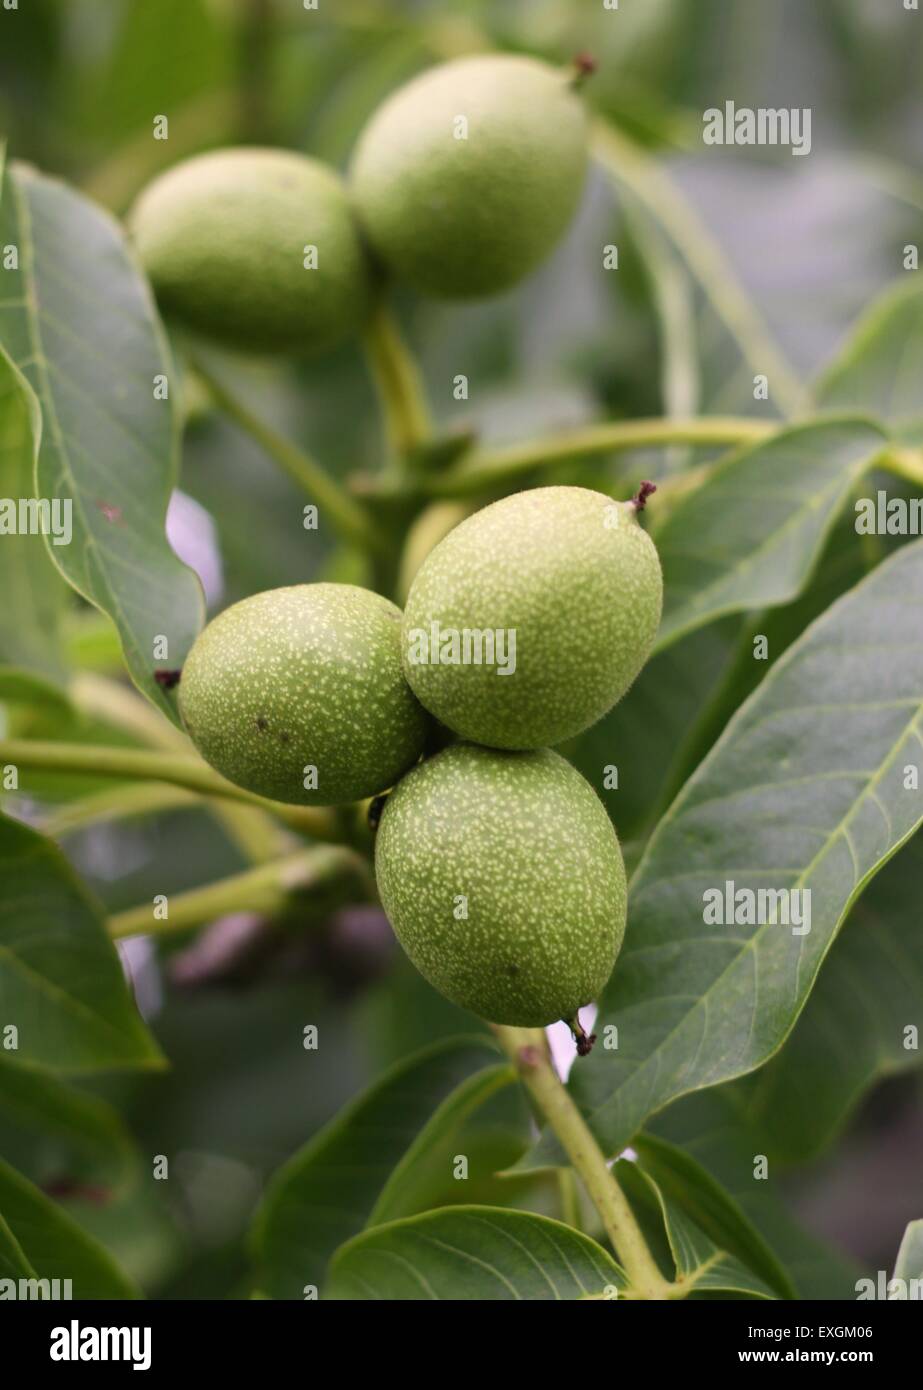 Immature Green walnuts on the tree with leaves Stock Photo